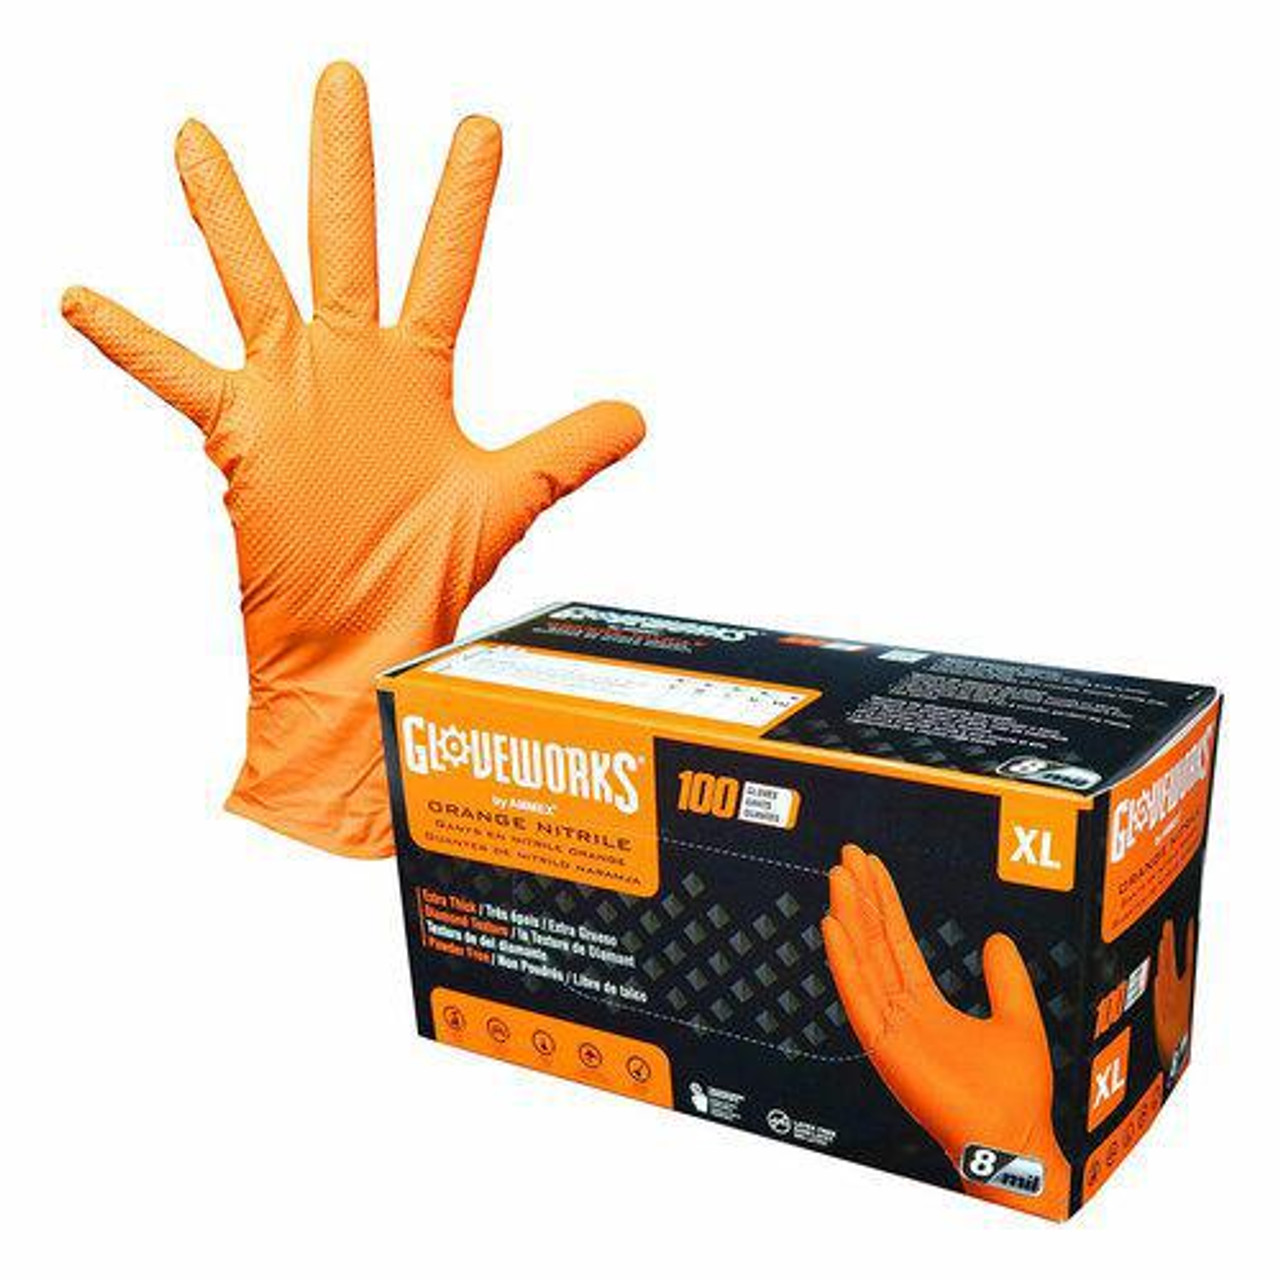 GLOVEWORKS HD Green Nitrile Disposable Gloves 8 Mil, Large, 100/Box